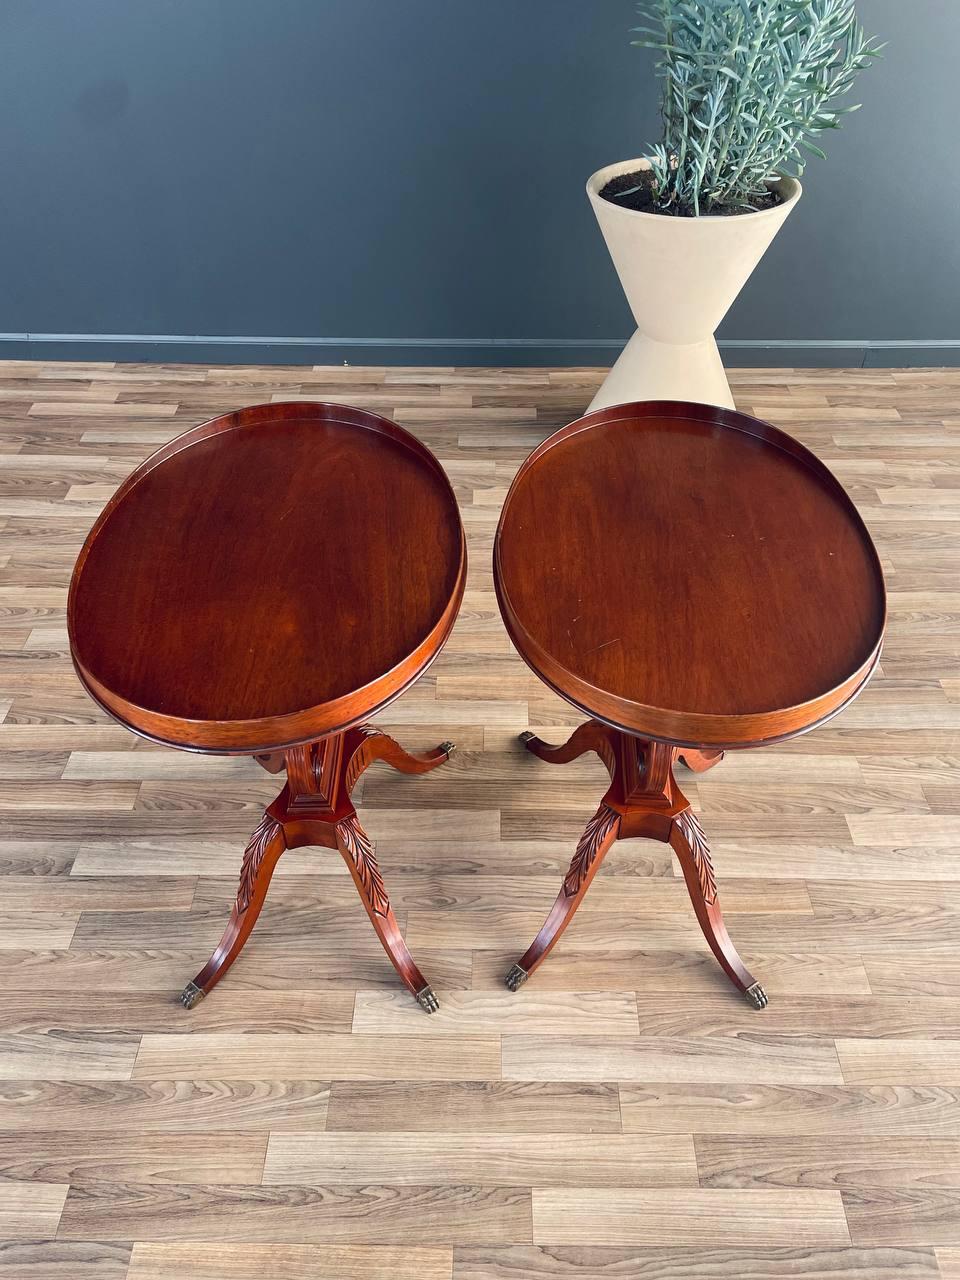 Pair of Antique Mahogany Neoclassical Side Tables With Lyre Bases For Sale 1